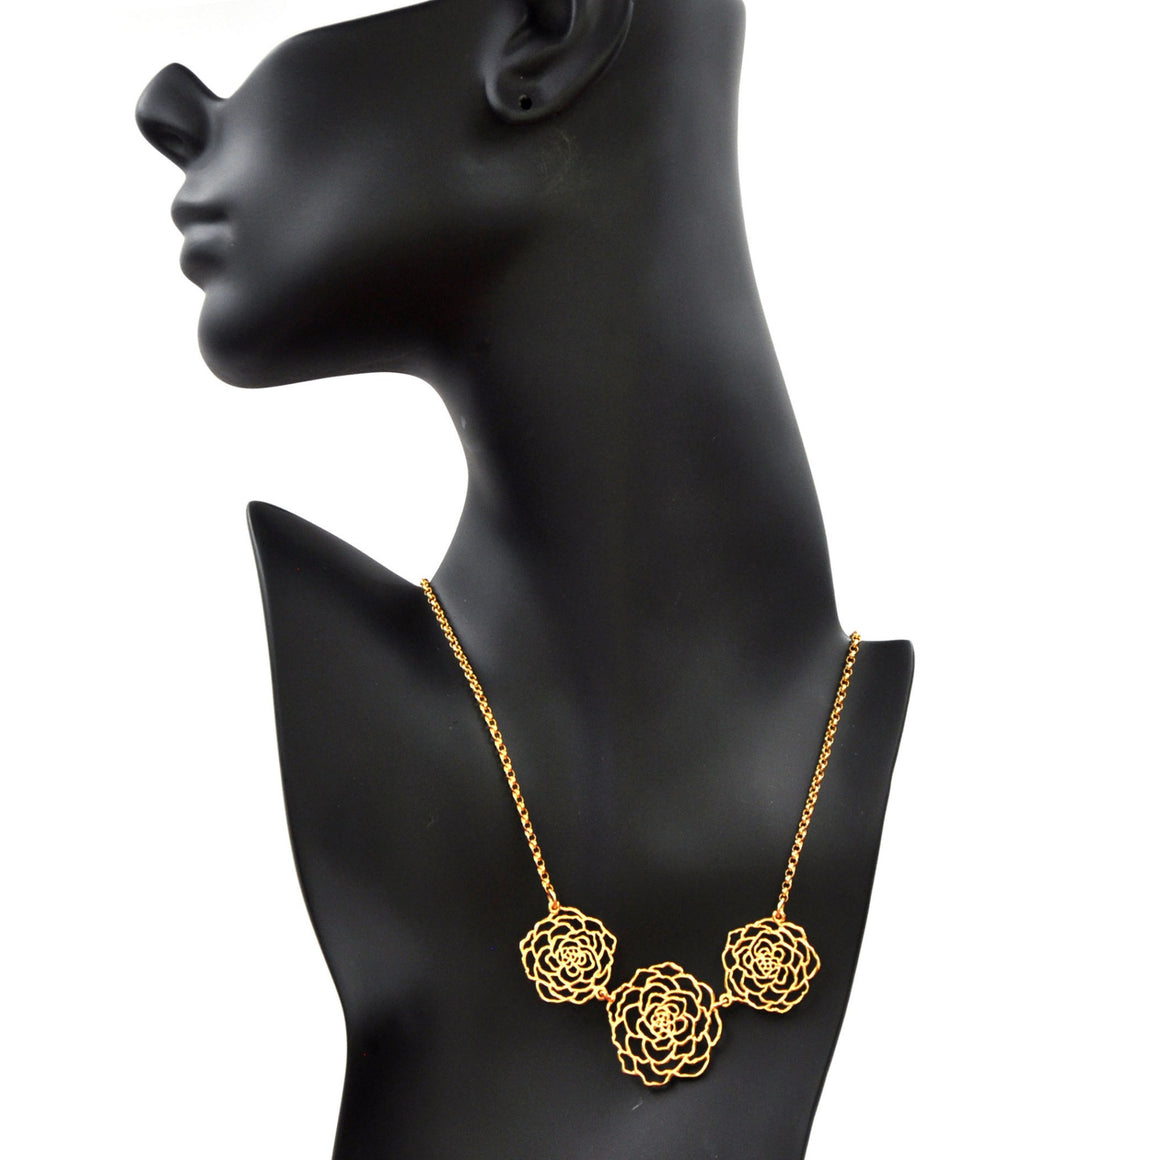 Rose Three Blooms Necklace - 24K Gold Plated